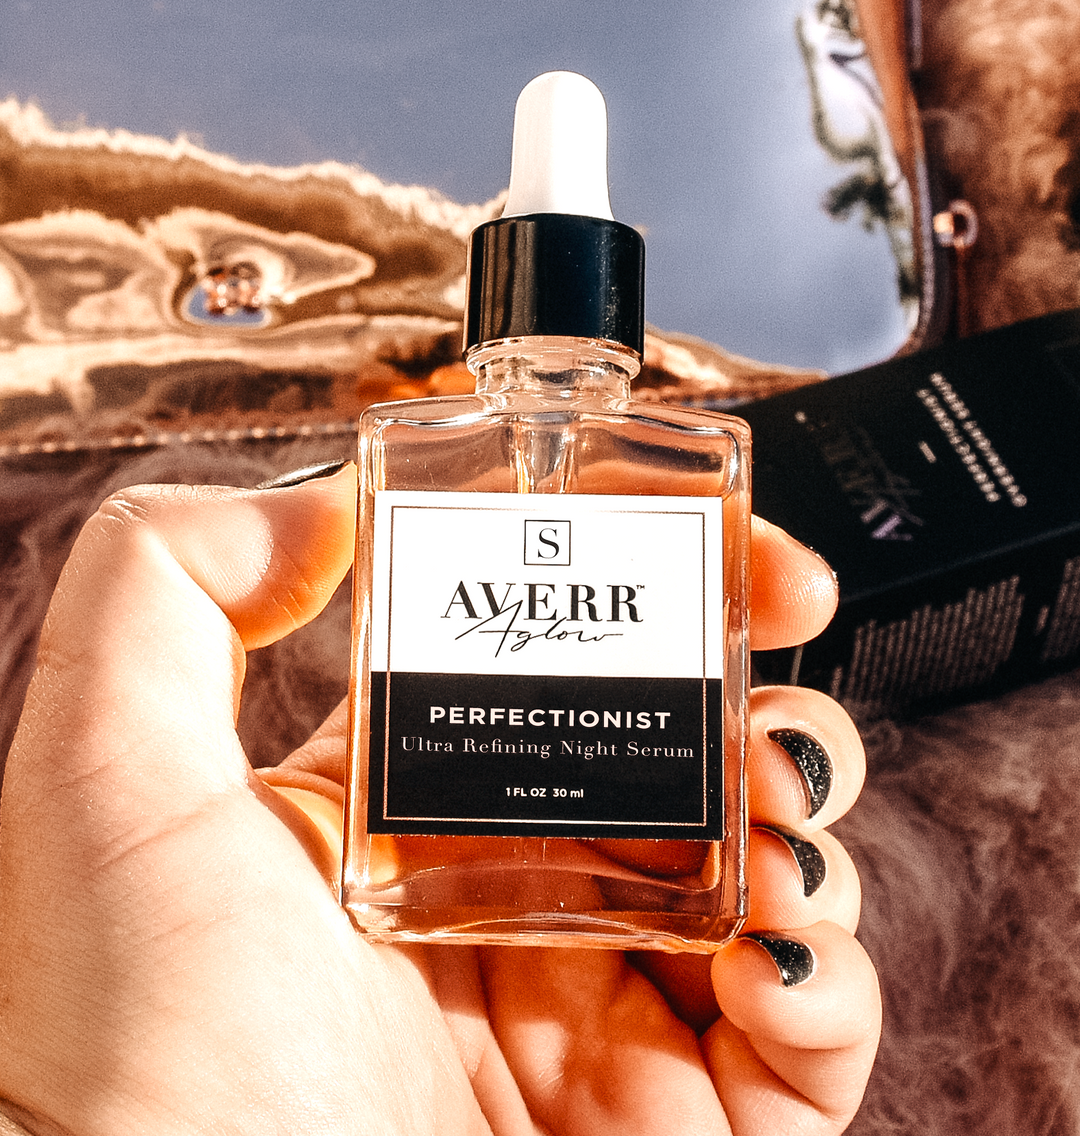 Model's hand with Averr Aglow perfectionist serum